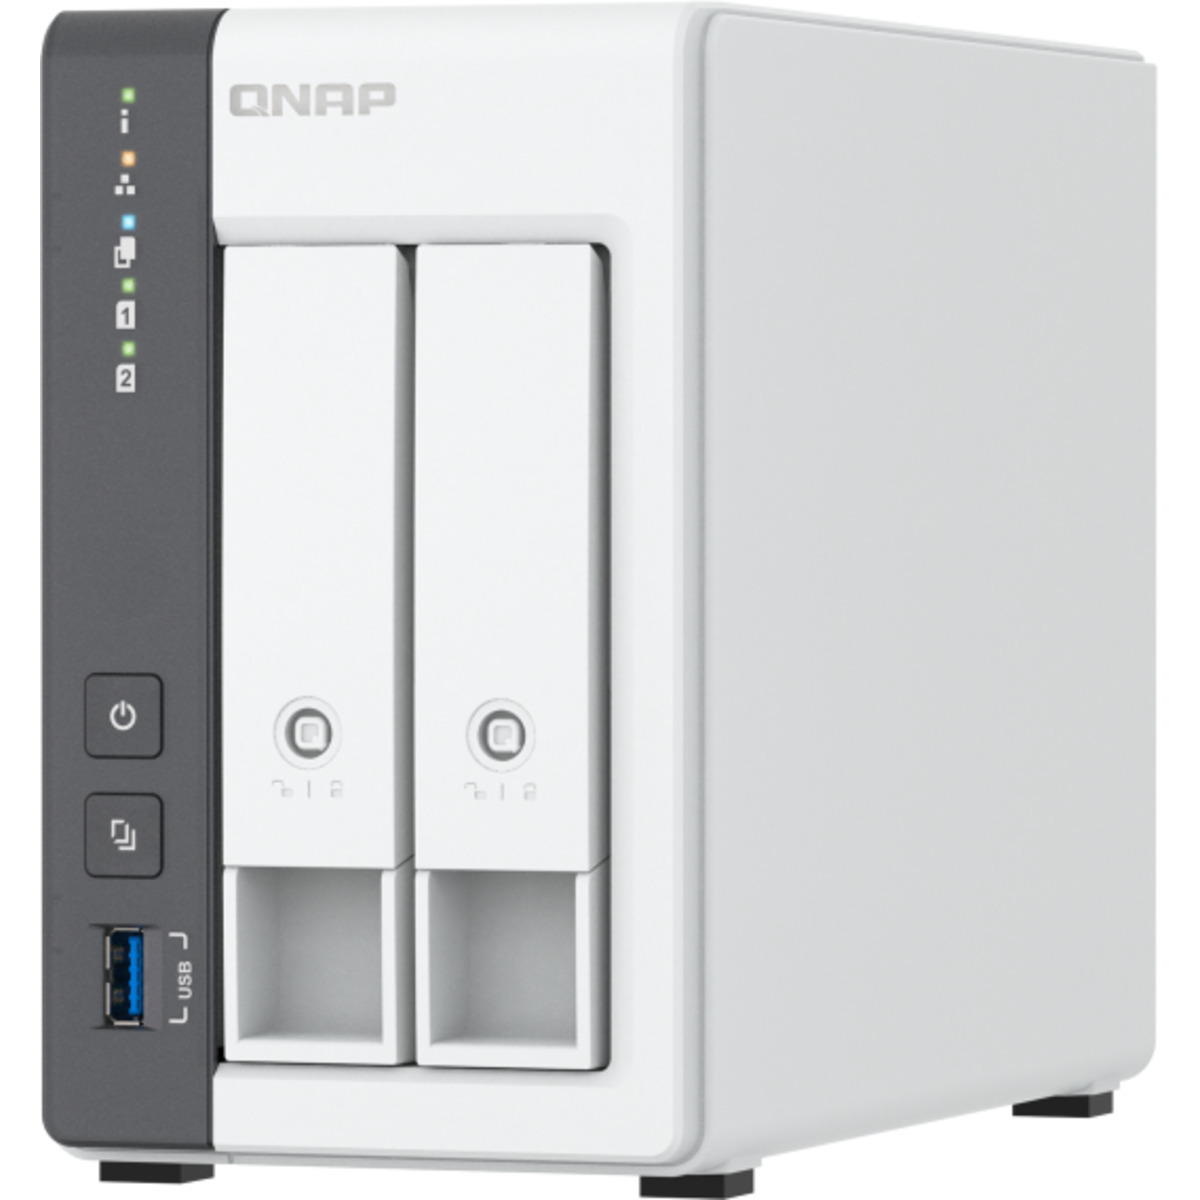 QNAP TS-216G 8tb 2-Bay Desktop Personal / Basic Home / Small Office NAS - Network Attached Storage Device 2x4tb Samsung 870 EVO MZ-77E4T0BAM 2.5 560/530MB/s SATA 6Gb/s SSD CONSUMER Class Drives Installed - Burn-In Tested - ON SALE TS-216G